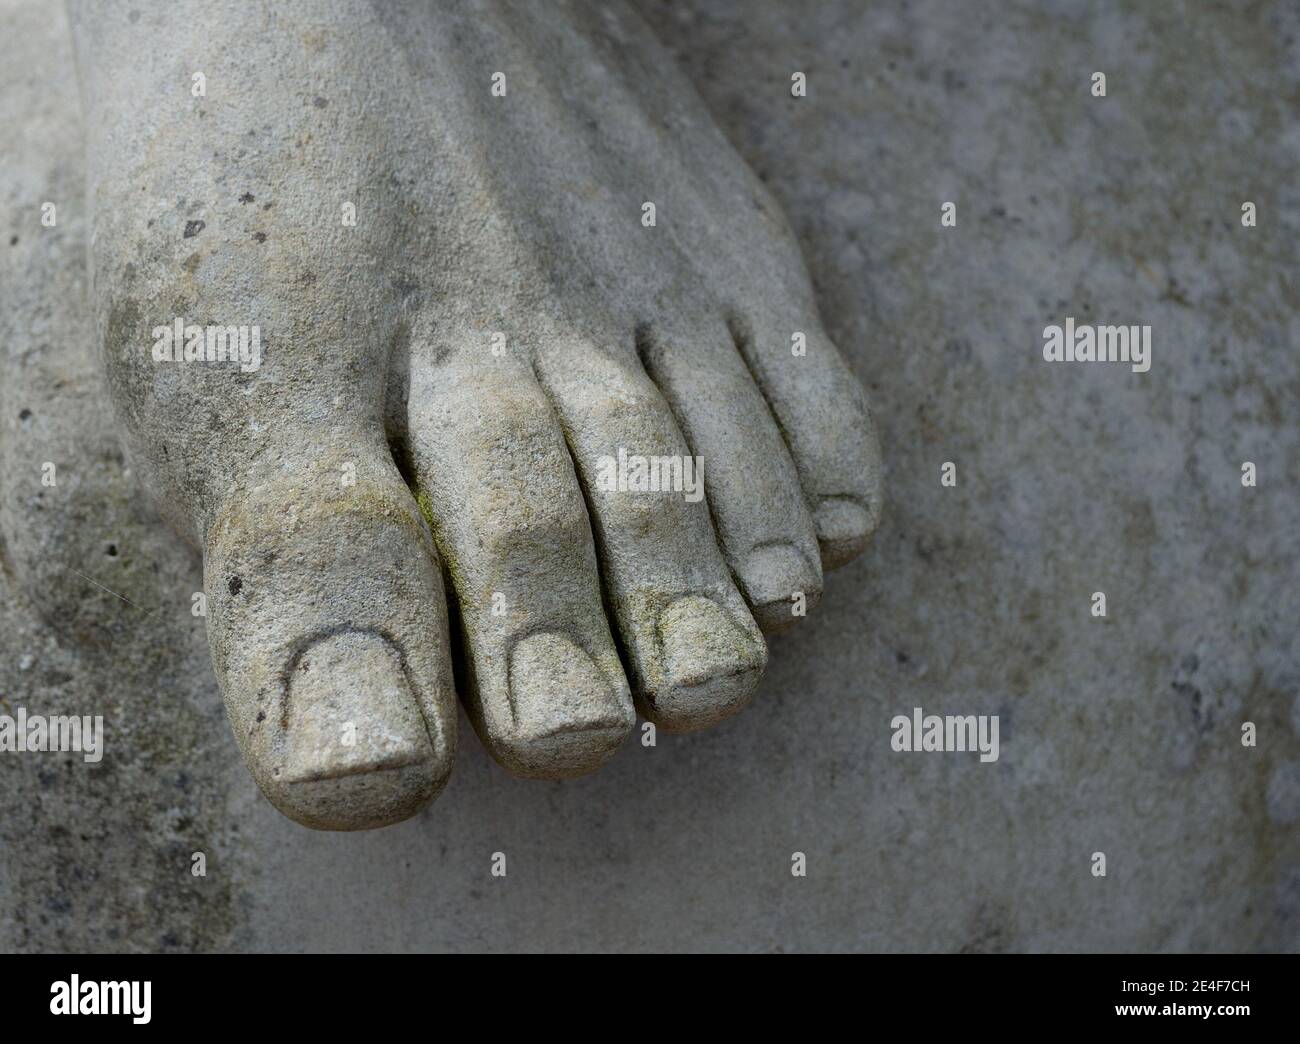 Detail of Foot of Statue toes and toenails Stock Photo